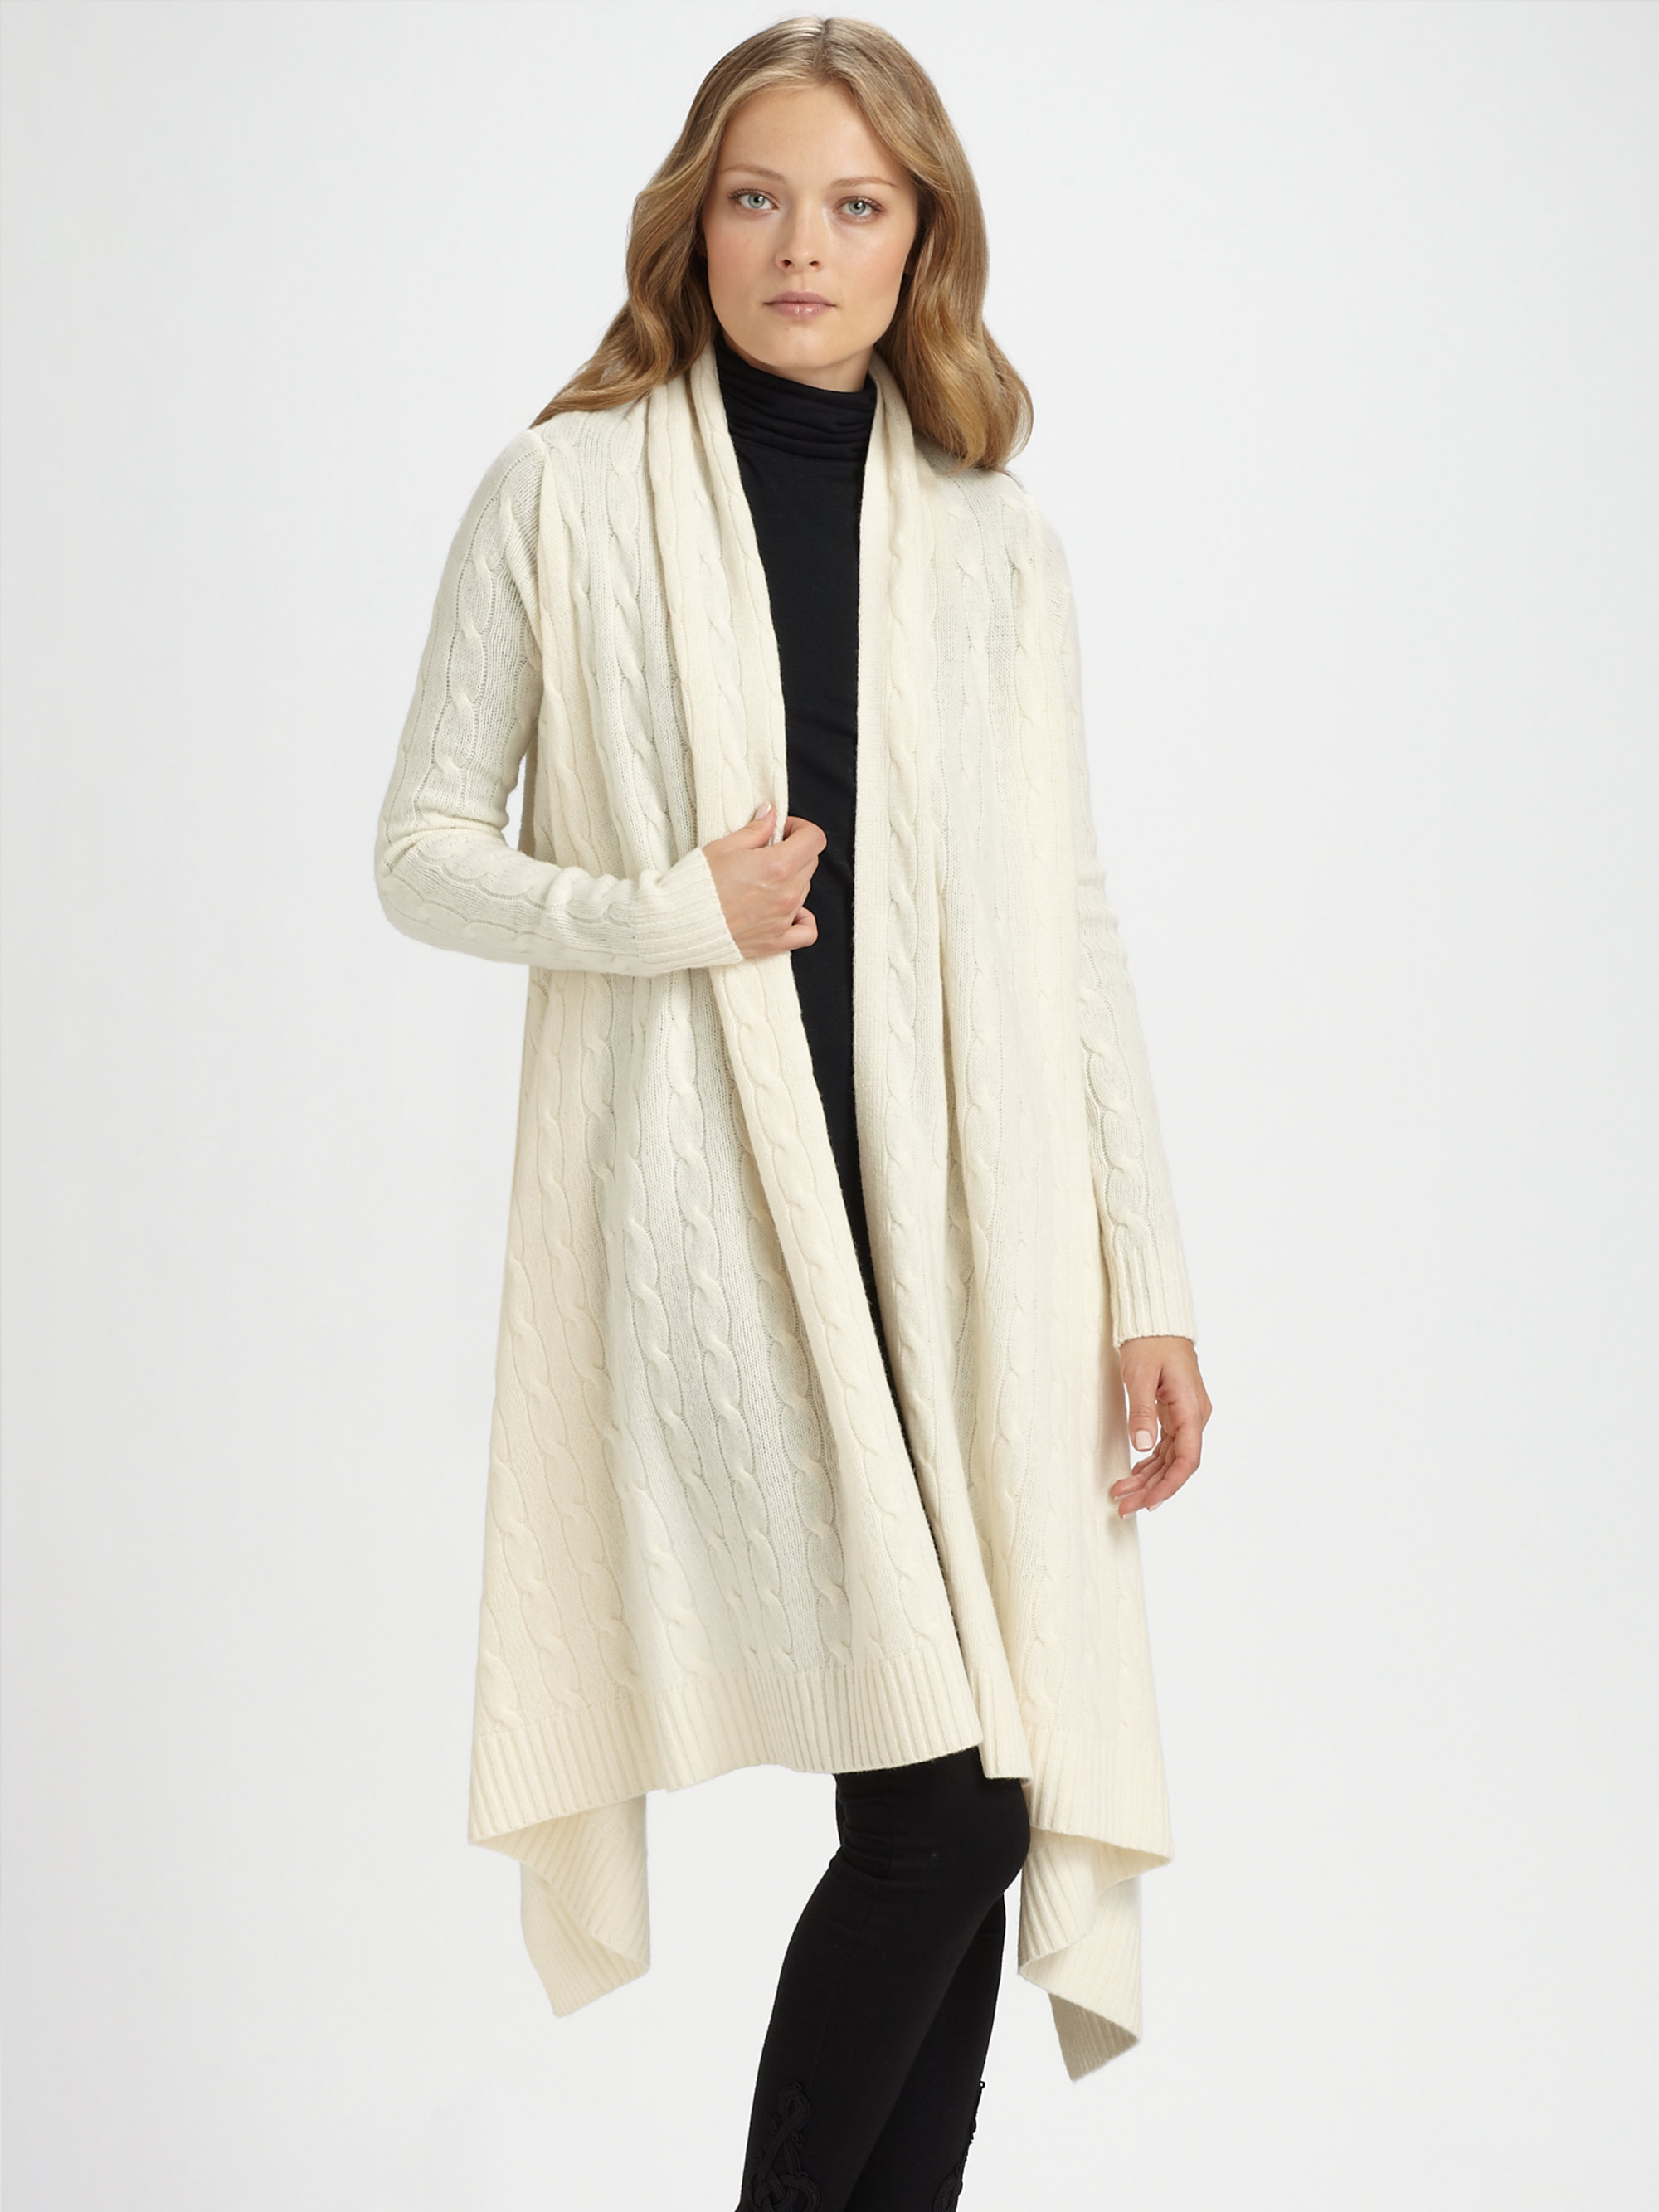 Ralph Lauren Blue Label Wool and Cashmere Cable-knit Wrap Cardigan in Black  (Natural) - Lyst